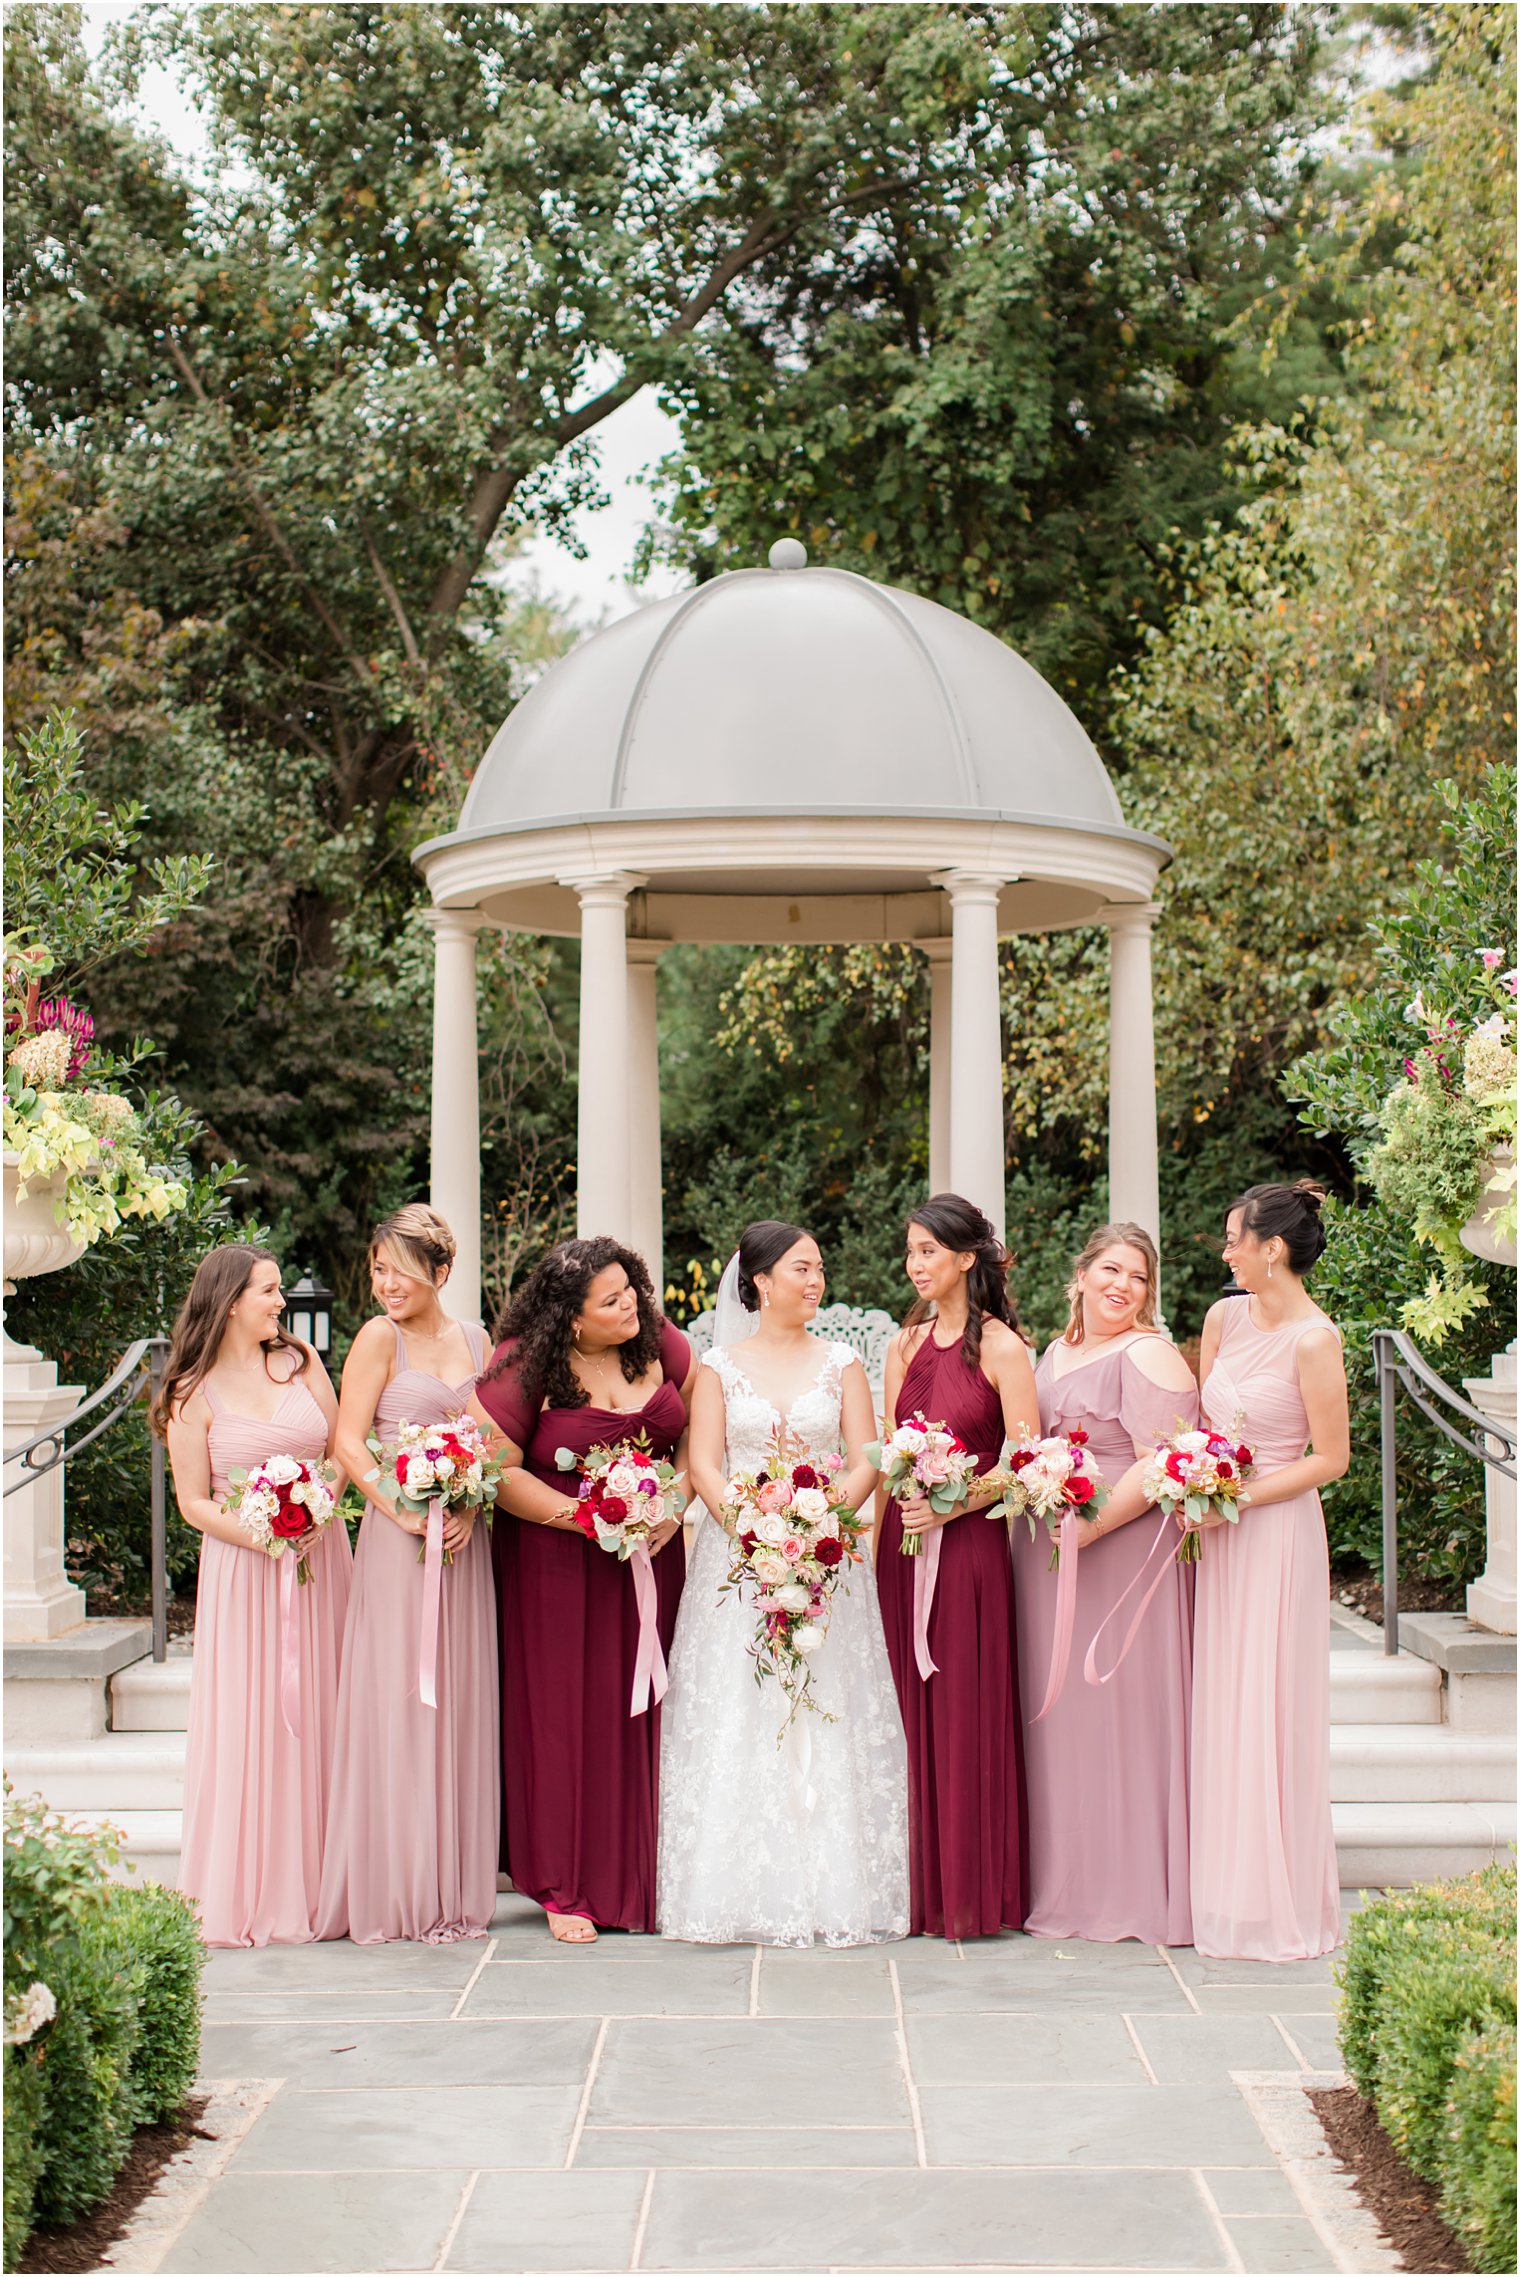 Park Chateau Estate wedding photos in the gardens with Idalia Photography